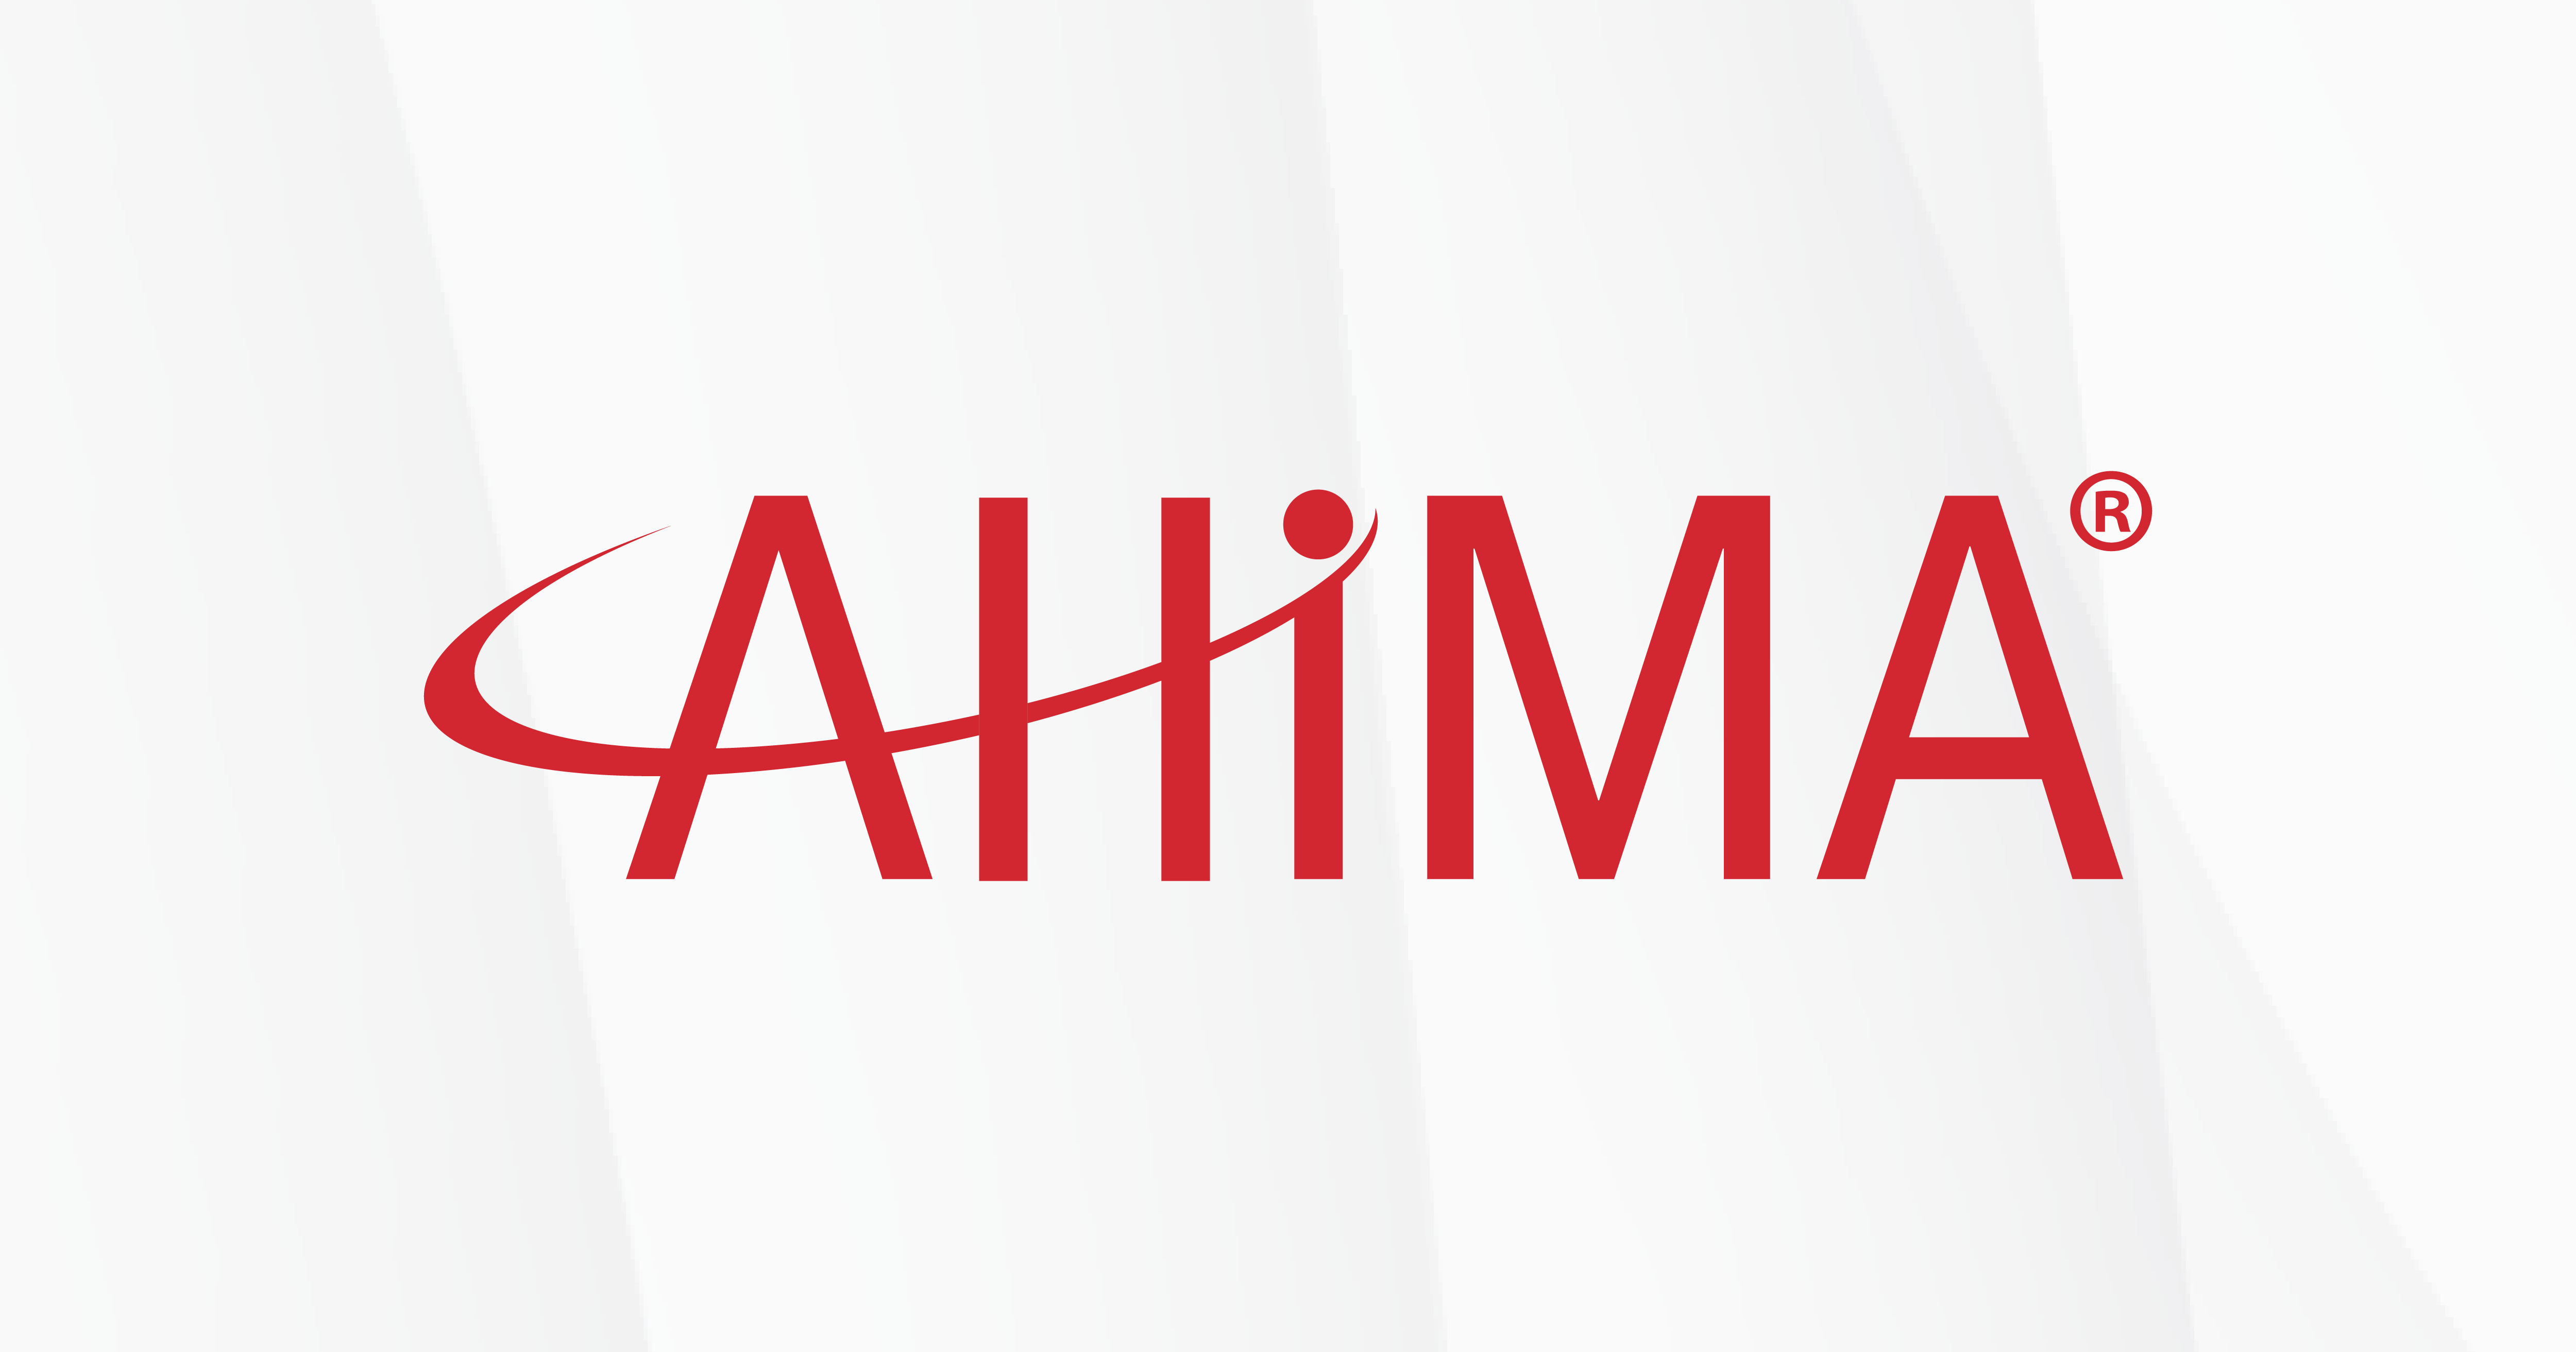 Product Details Ahioma - Your Virtual Market